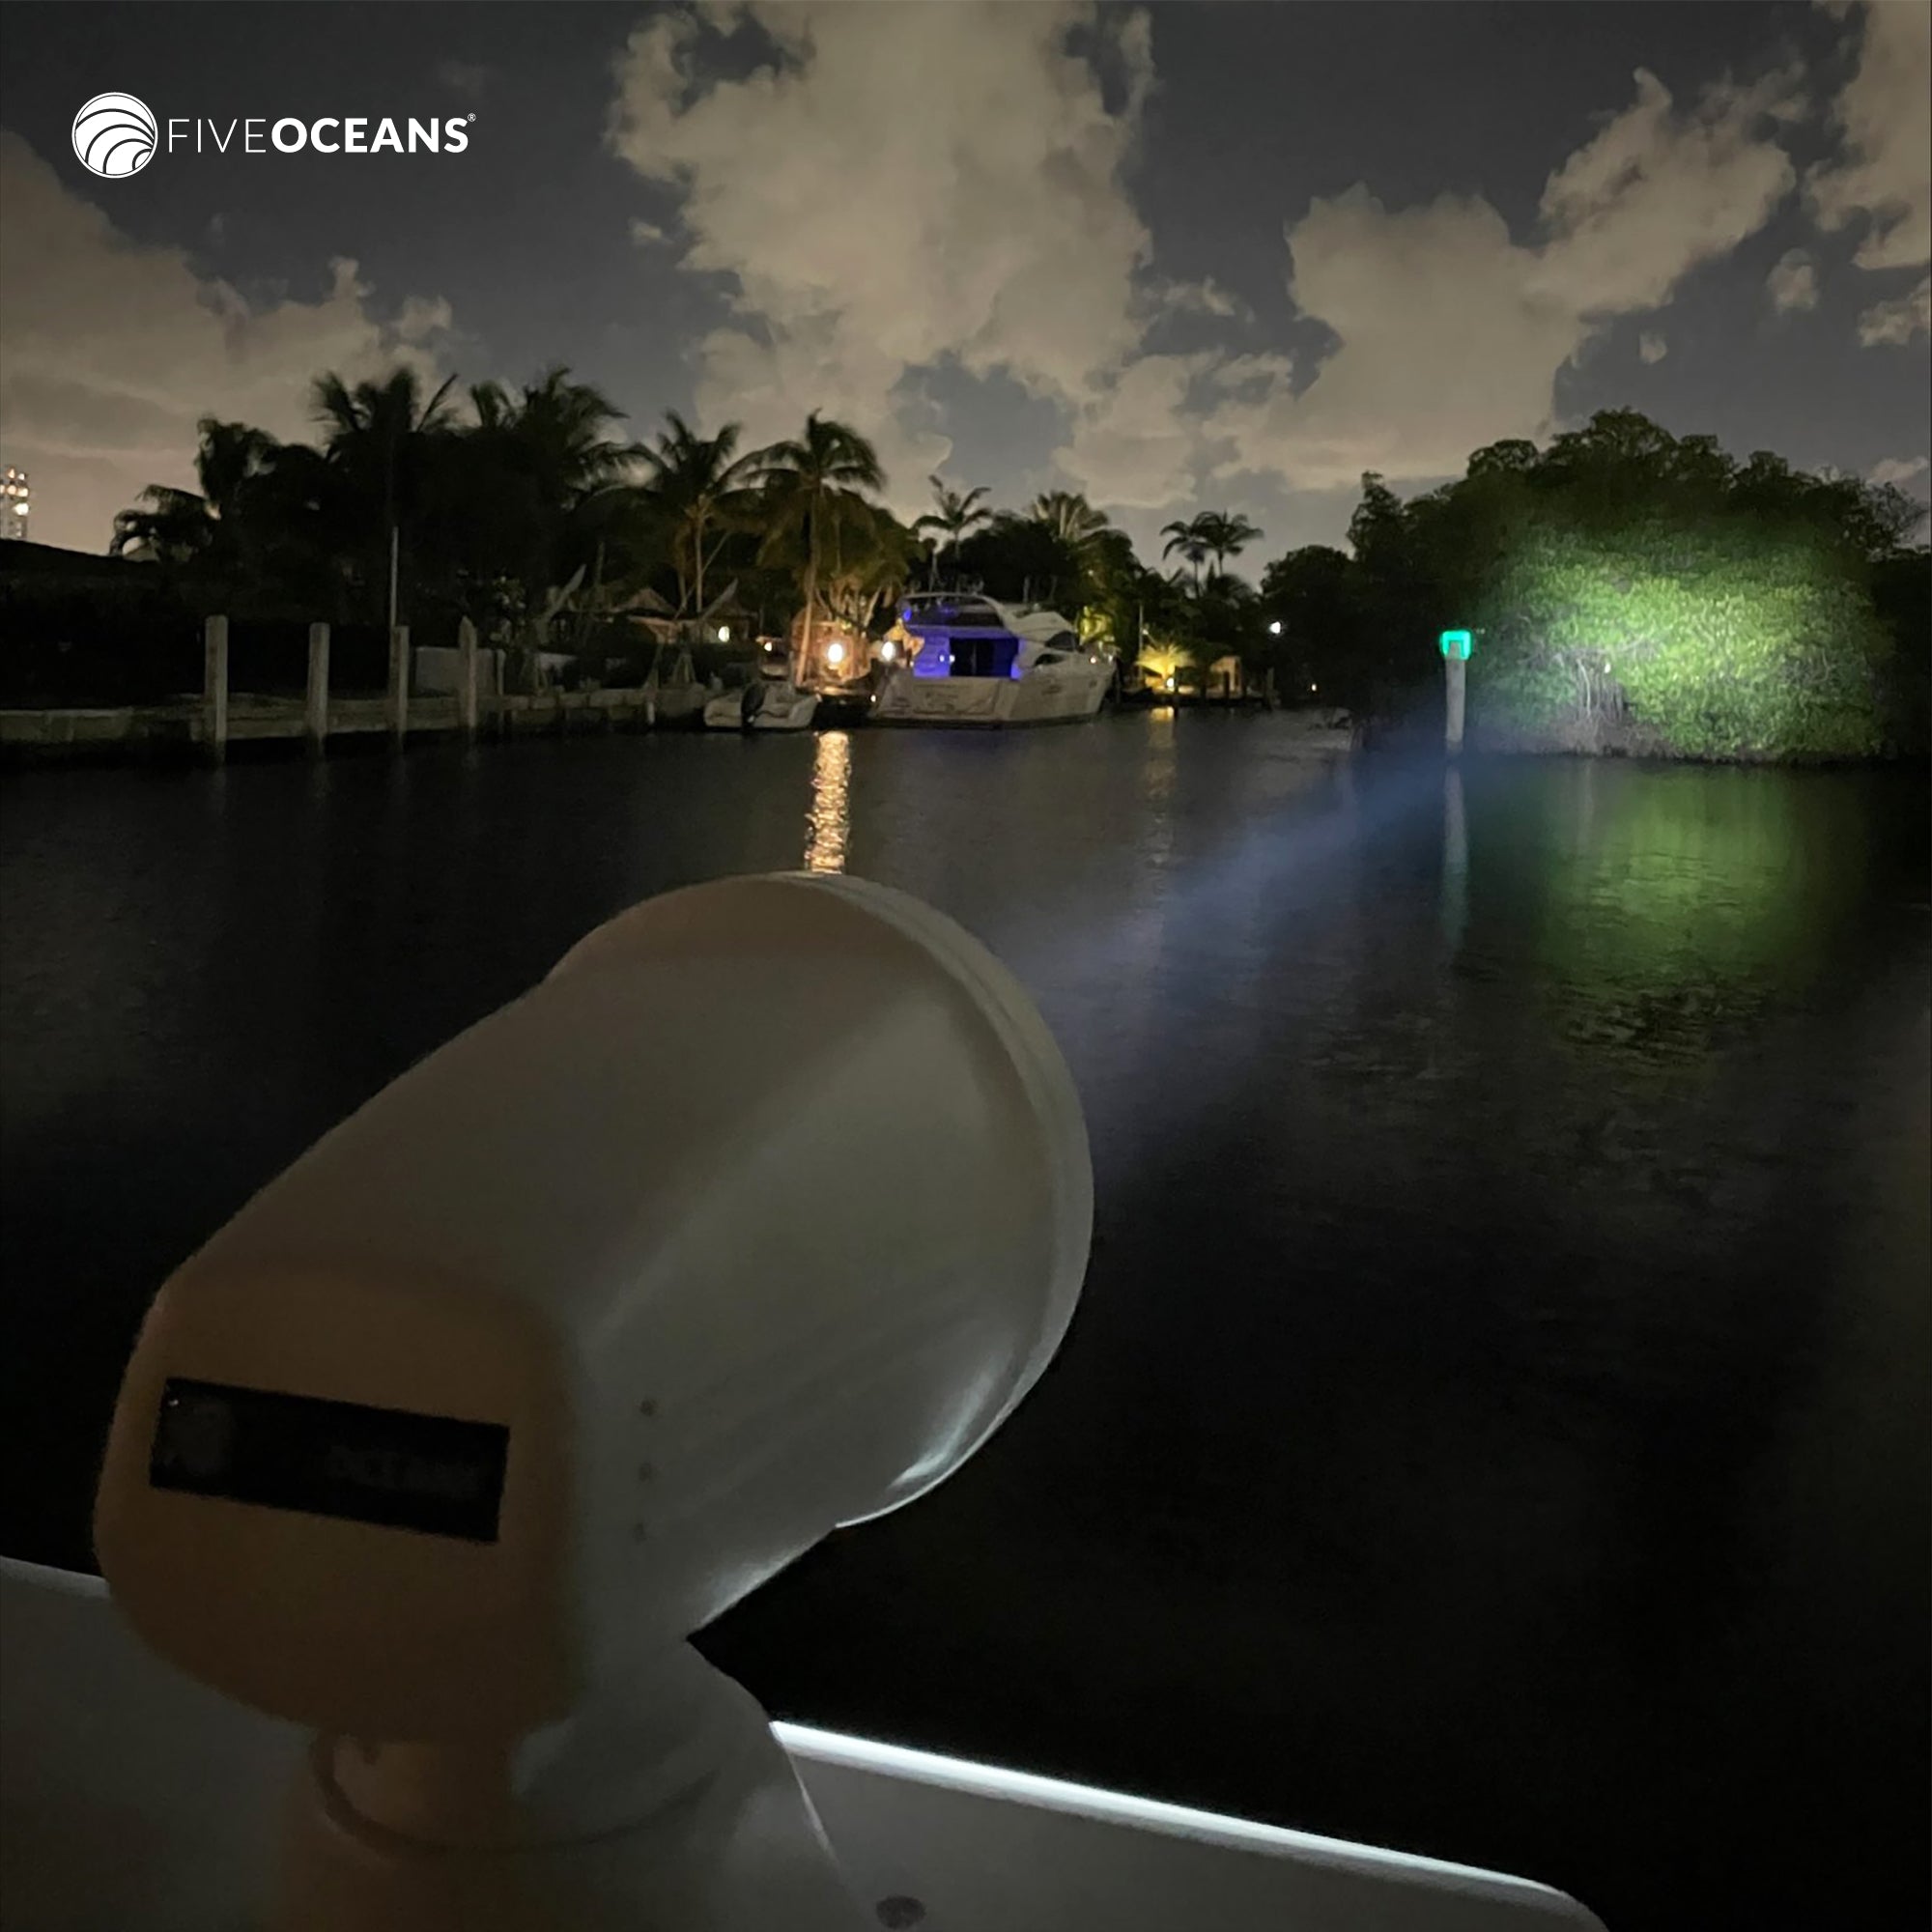 Boat Spotlight, LED Wireless Remote Controlled 3500 LM, 12V DC - FO4519